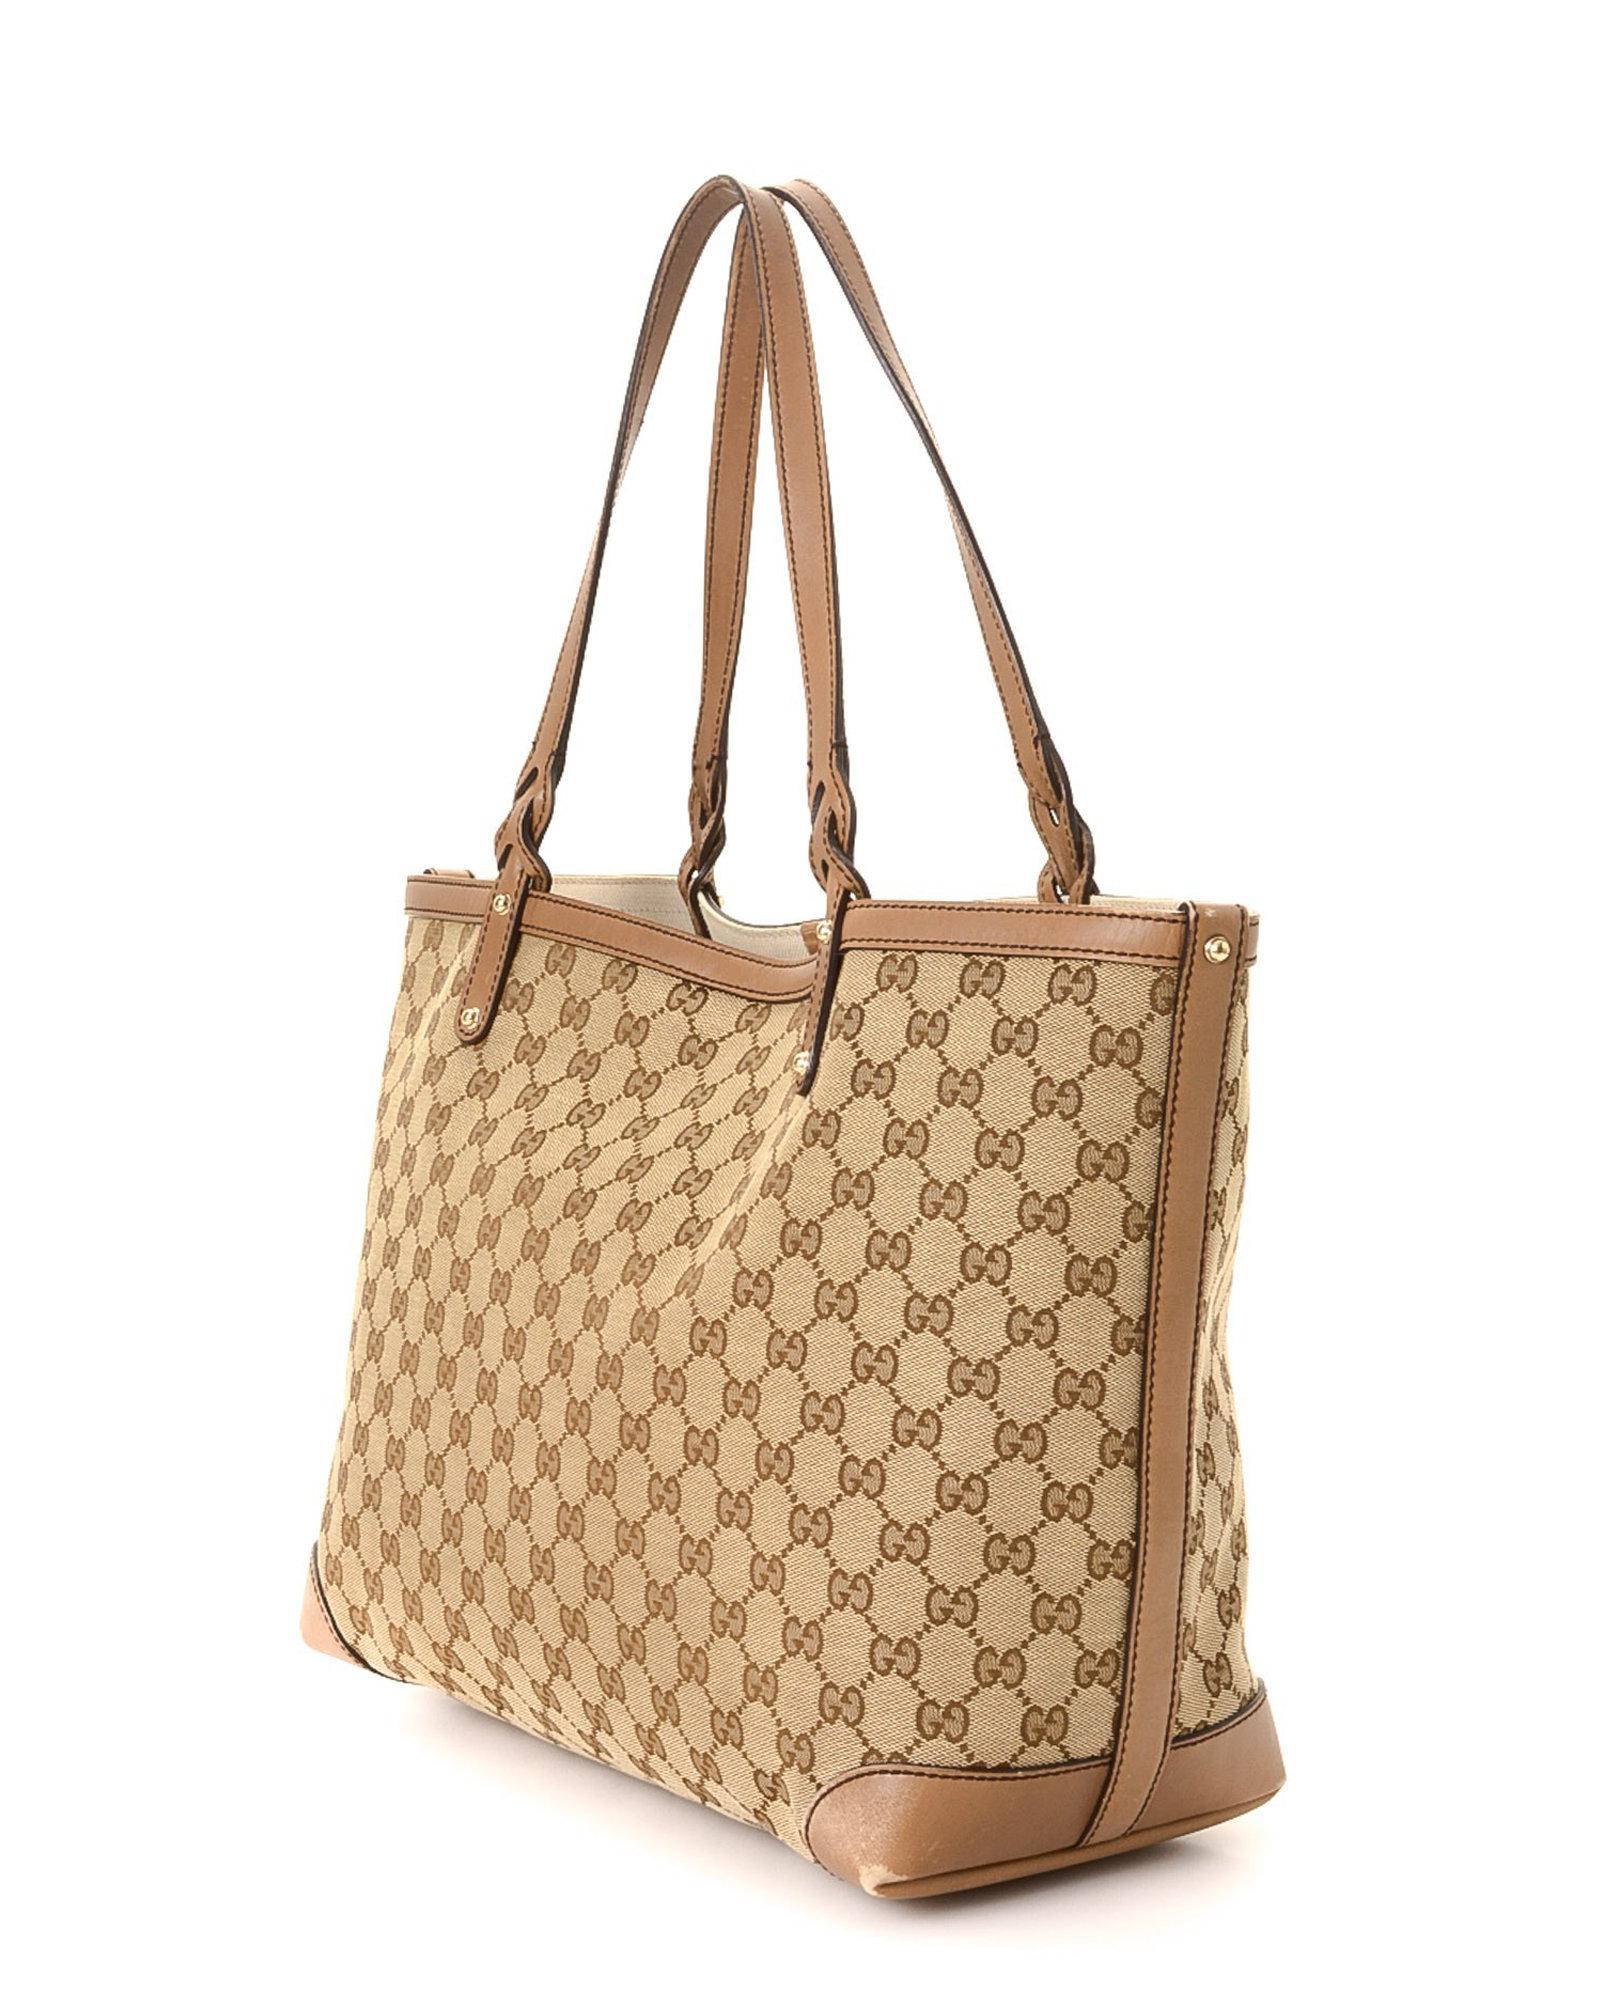 Gucci Gg Canvas Tote Bag - Vintage in Beige (Natural) - Lyst